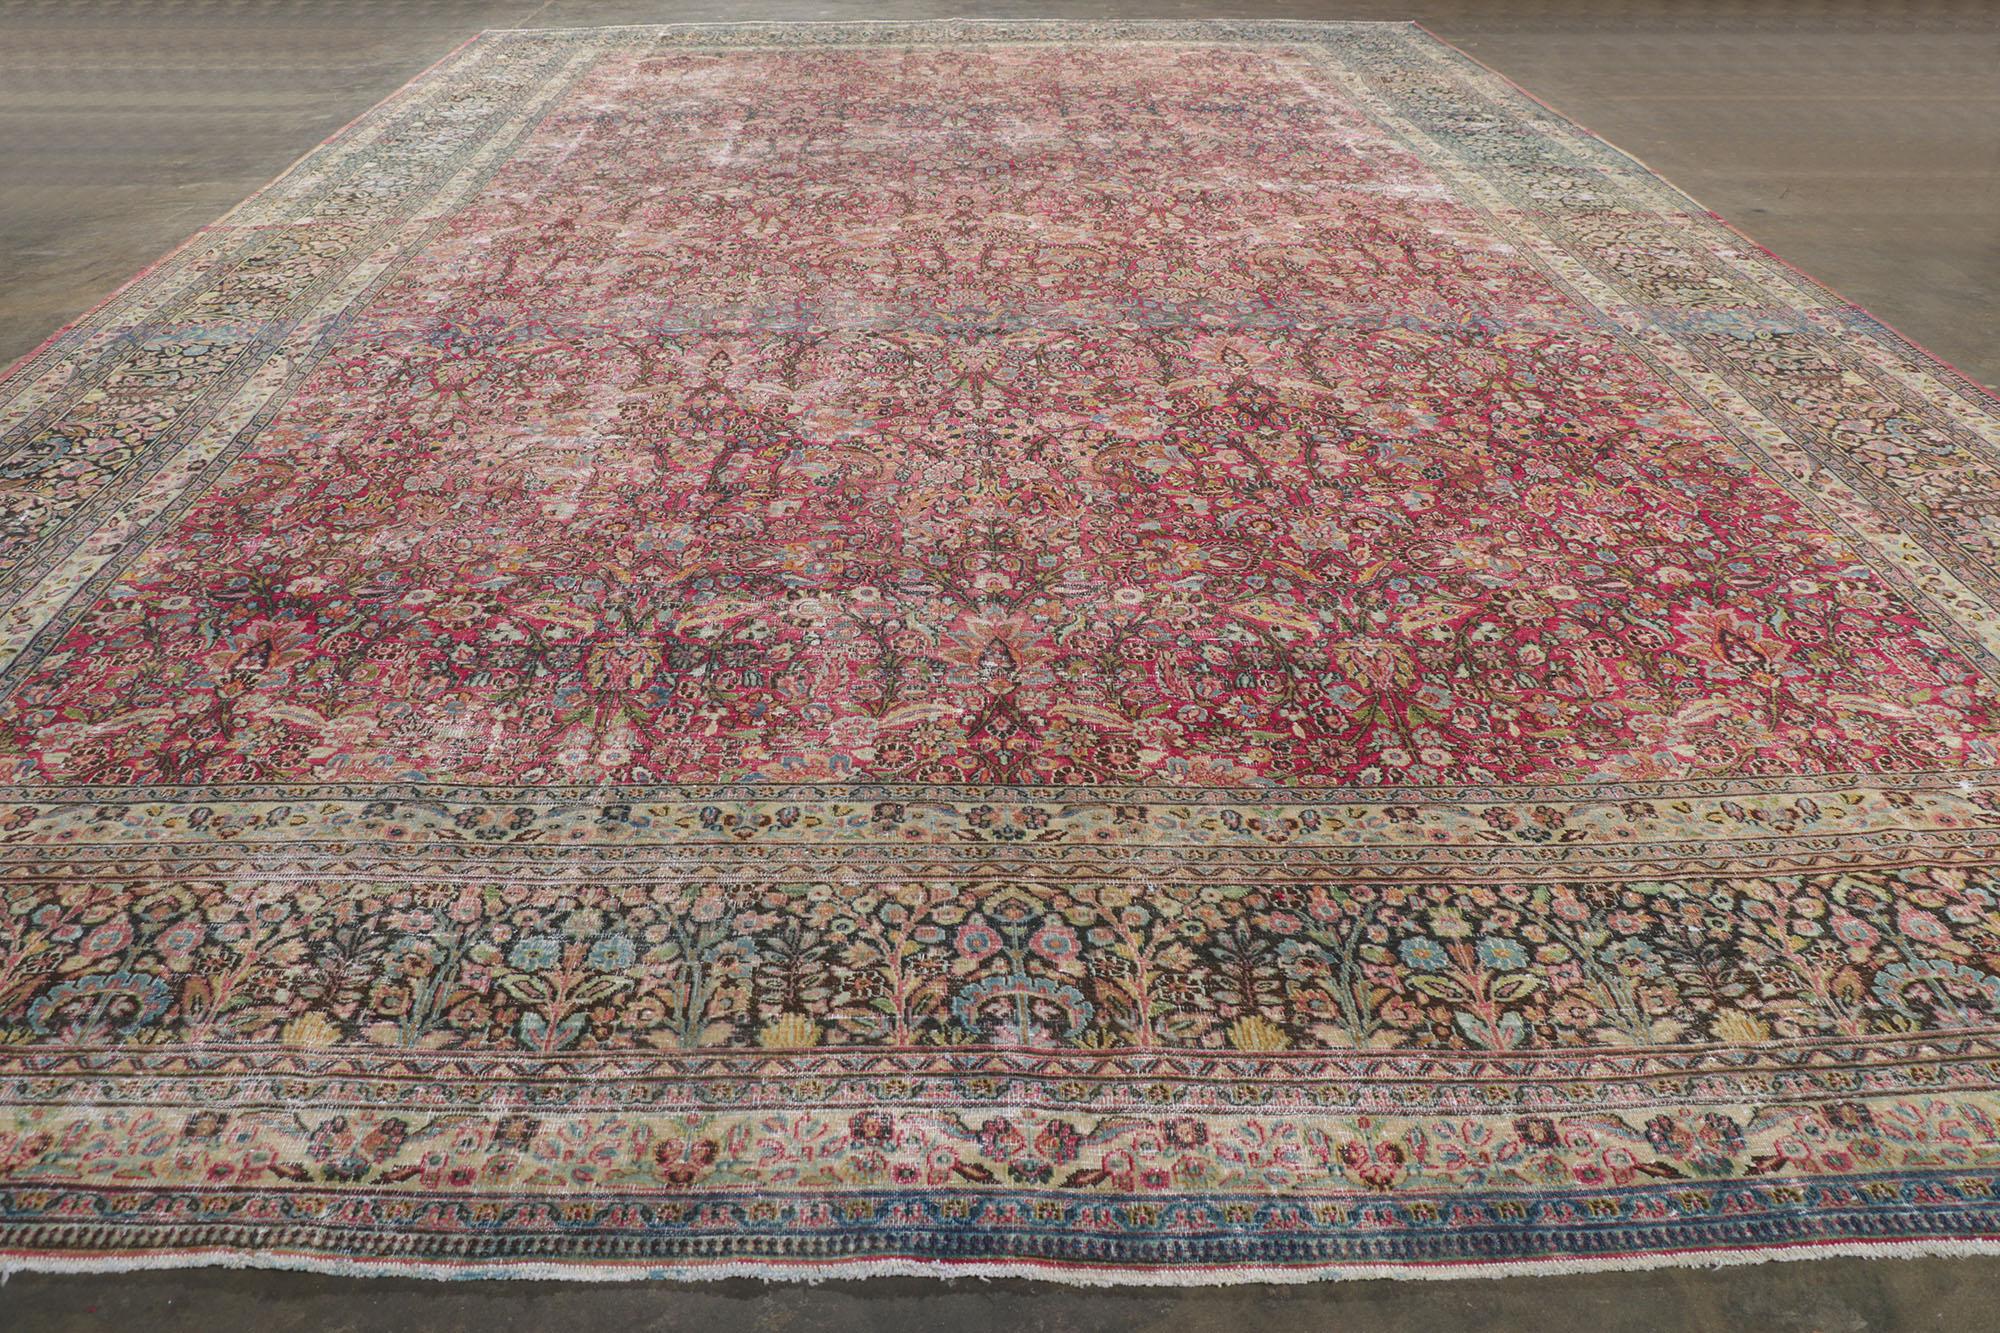 Antique-Worn Persian Khorassan Rug, Victorian Elegance Meets Weathered Finesse For Sale 1